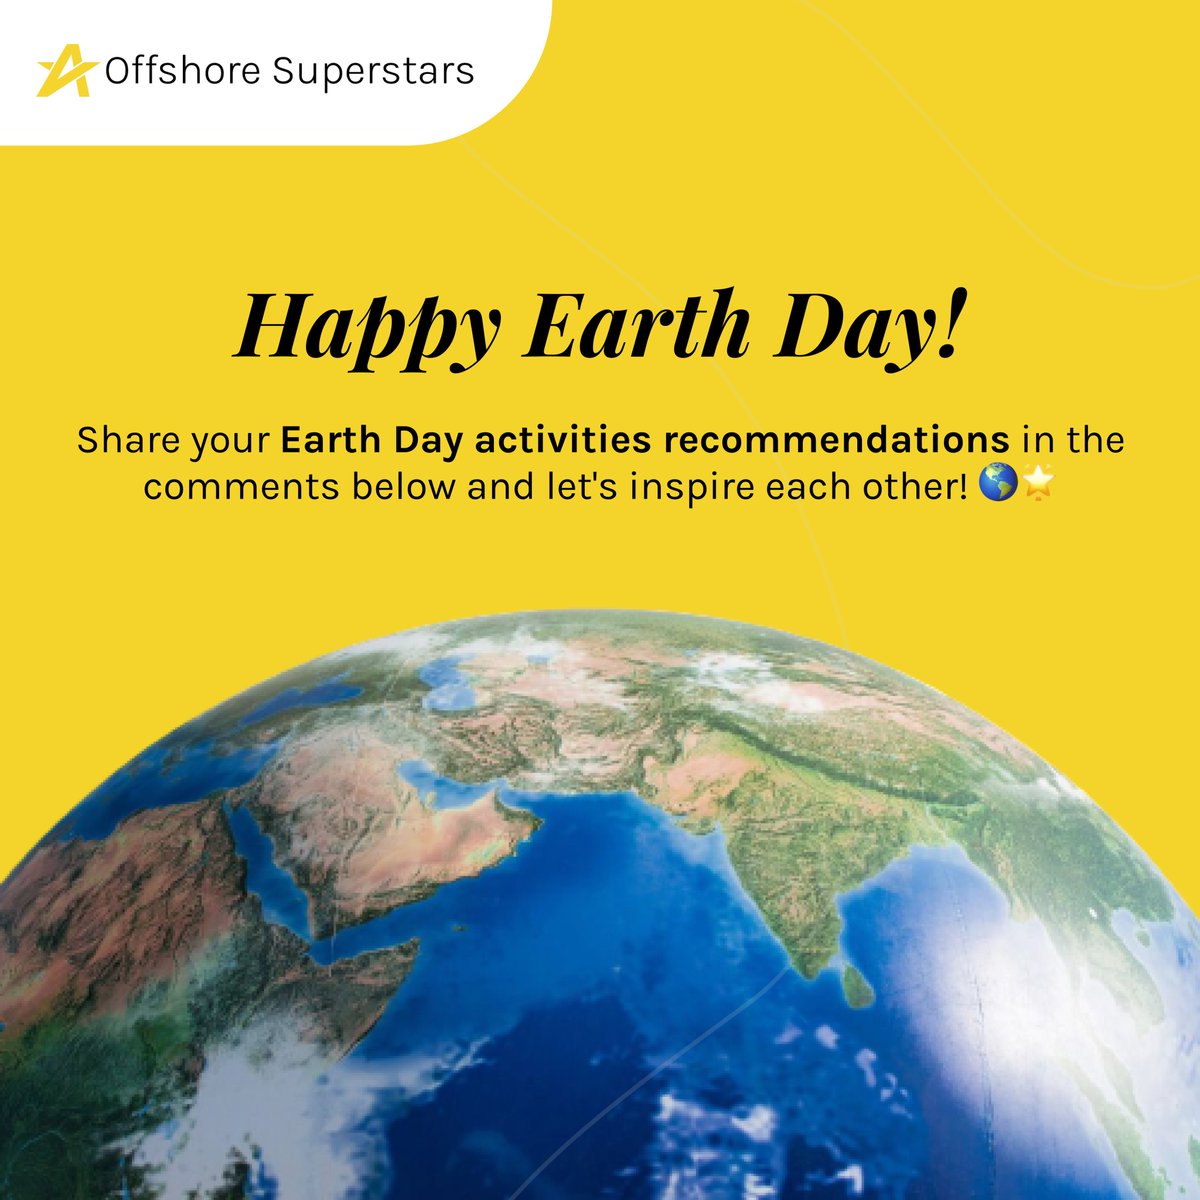 Happy Earth Day! Let’s celebrate and protect our beautiful planet today and every day 🌍🌟

#EarthDay #ProtectOurPlanet #OffshoreSuperstars #career #globalcareer #remotework #internship #workopportunities